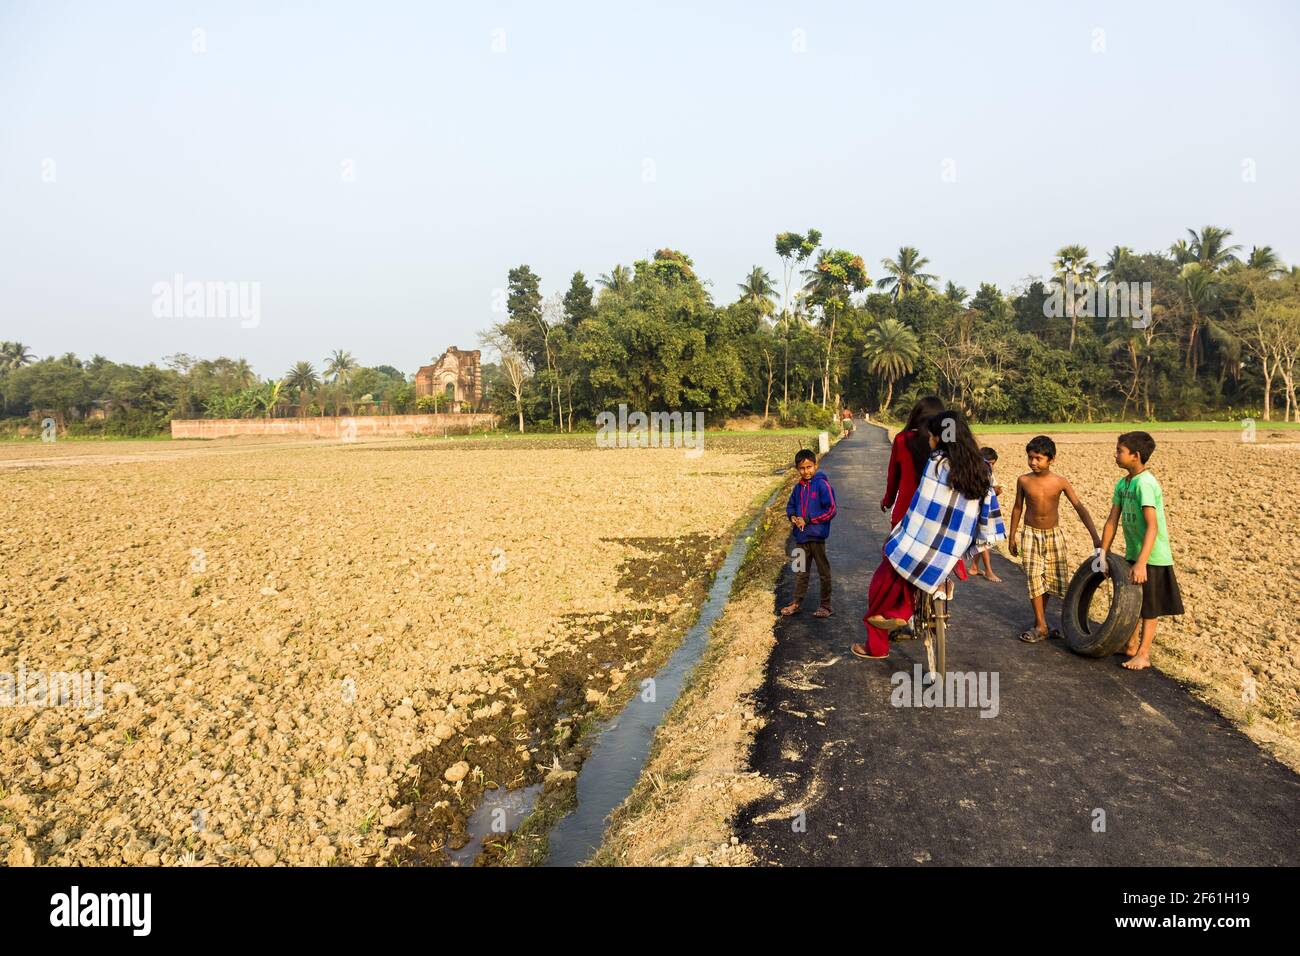 Murshidabad, West Bengal, India - January 2018: Girls riding a bicycle past a group of boys on a rural country road in the fields in the town of Mursh Stock Photo